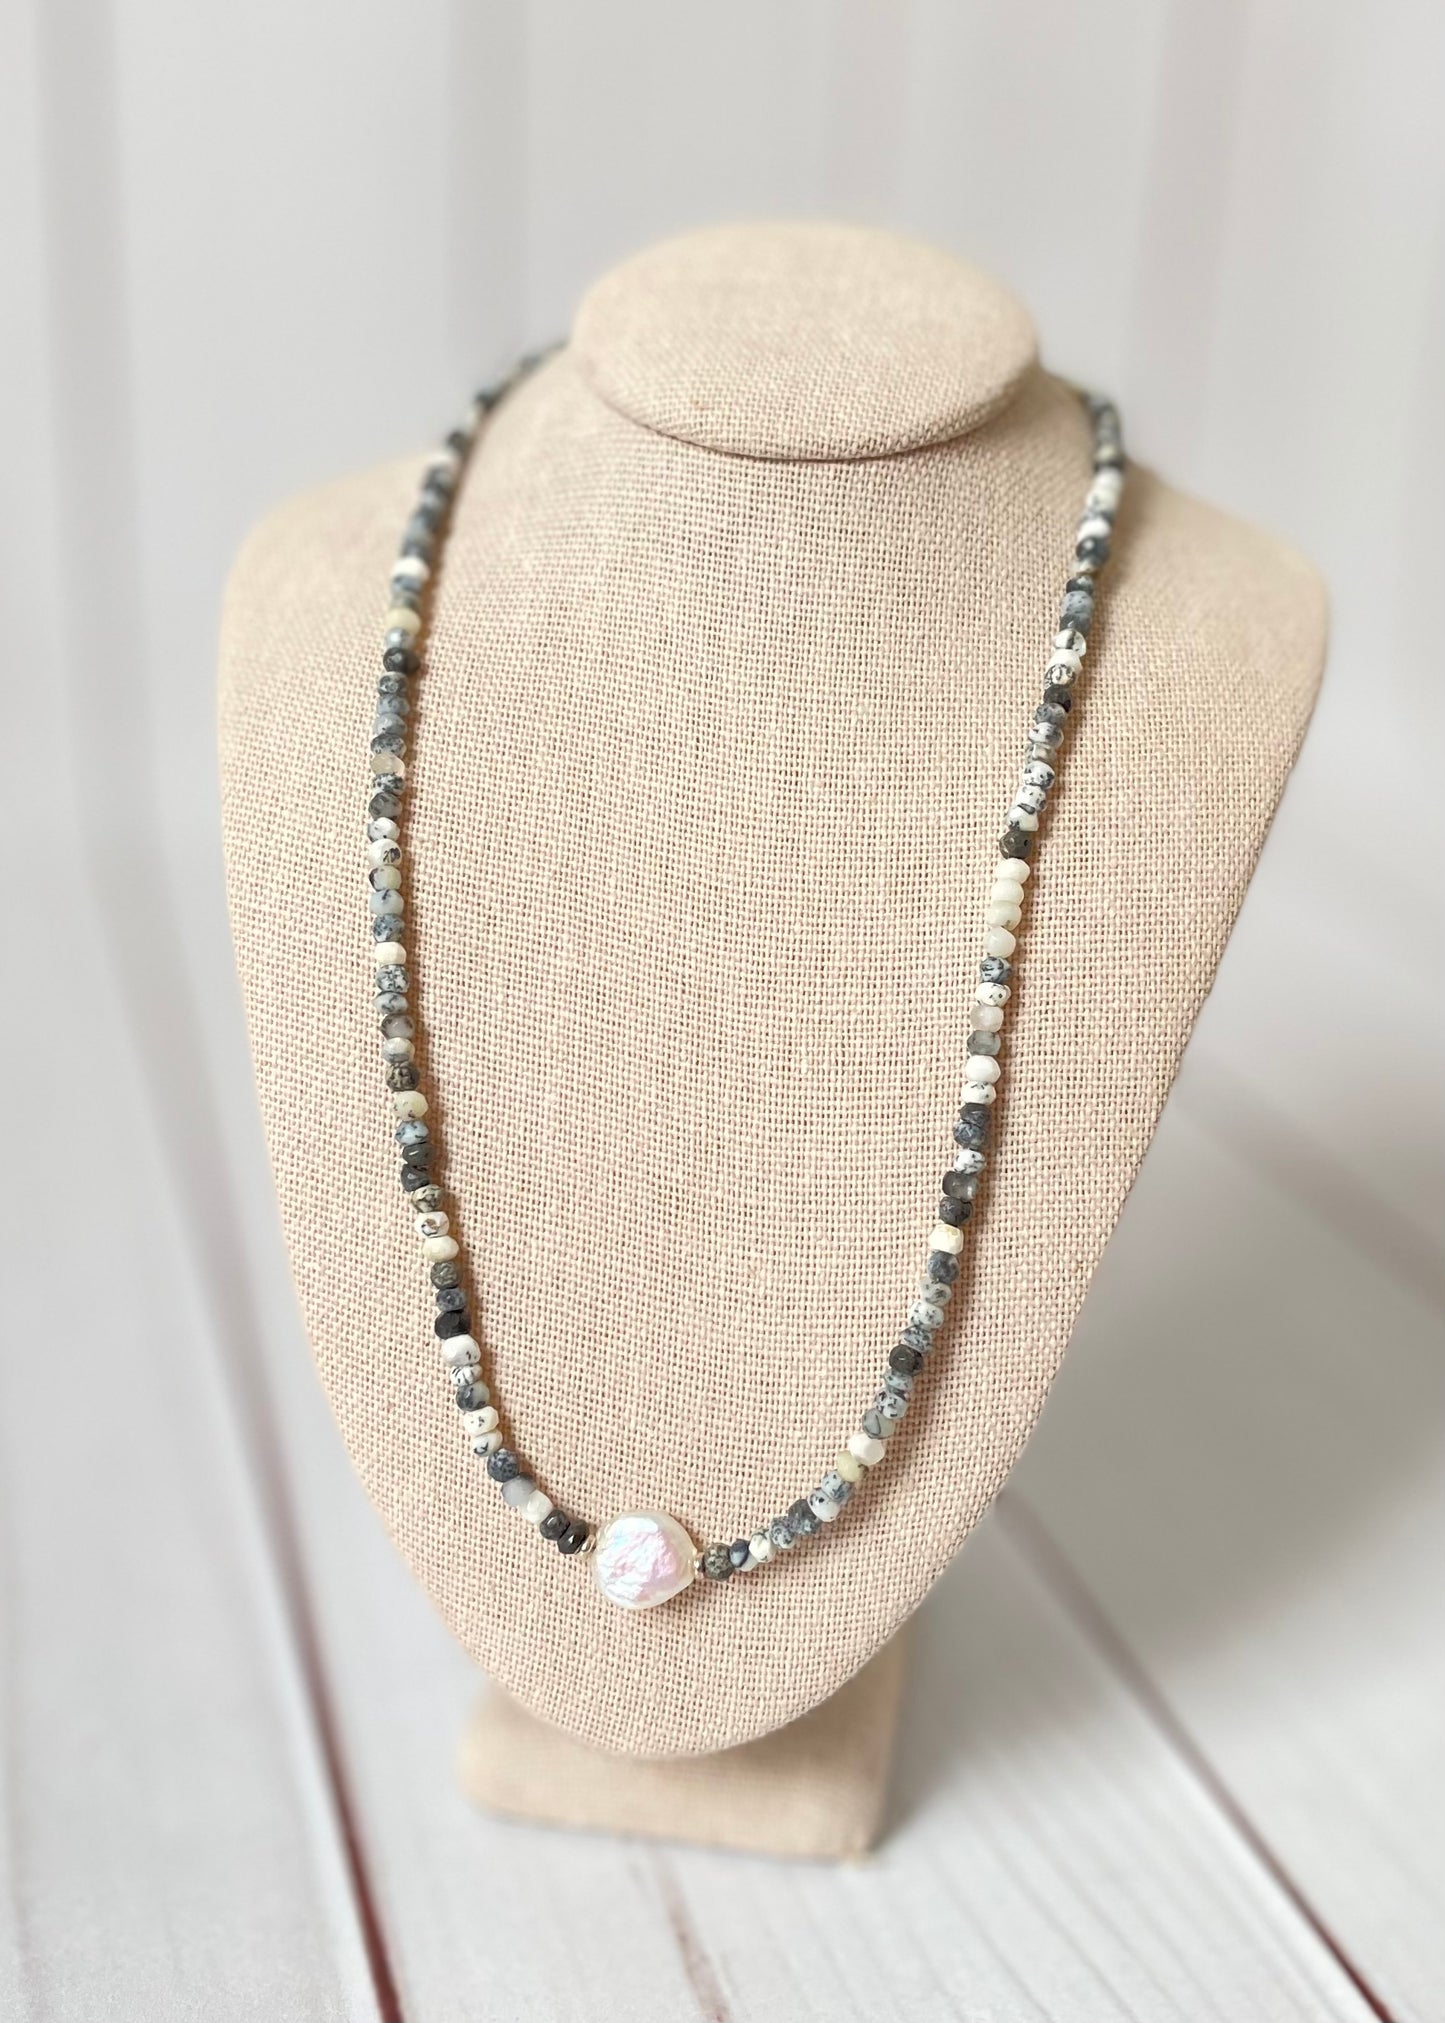 Dendritic Opal and Pearl Necklace 16"